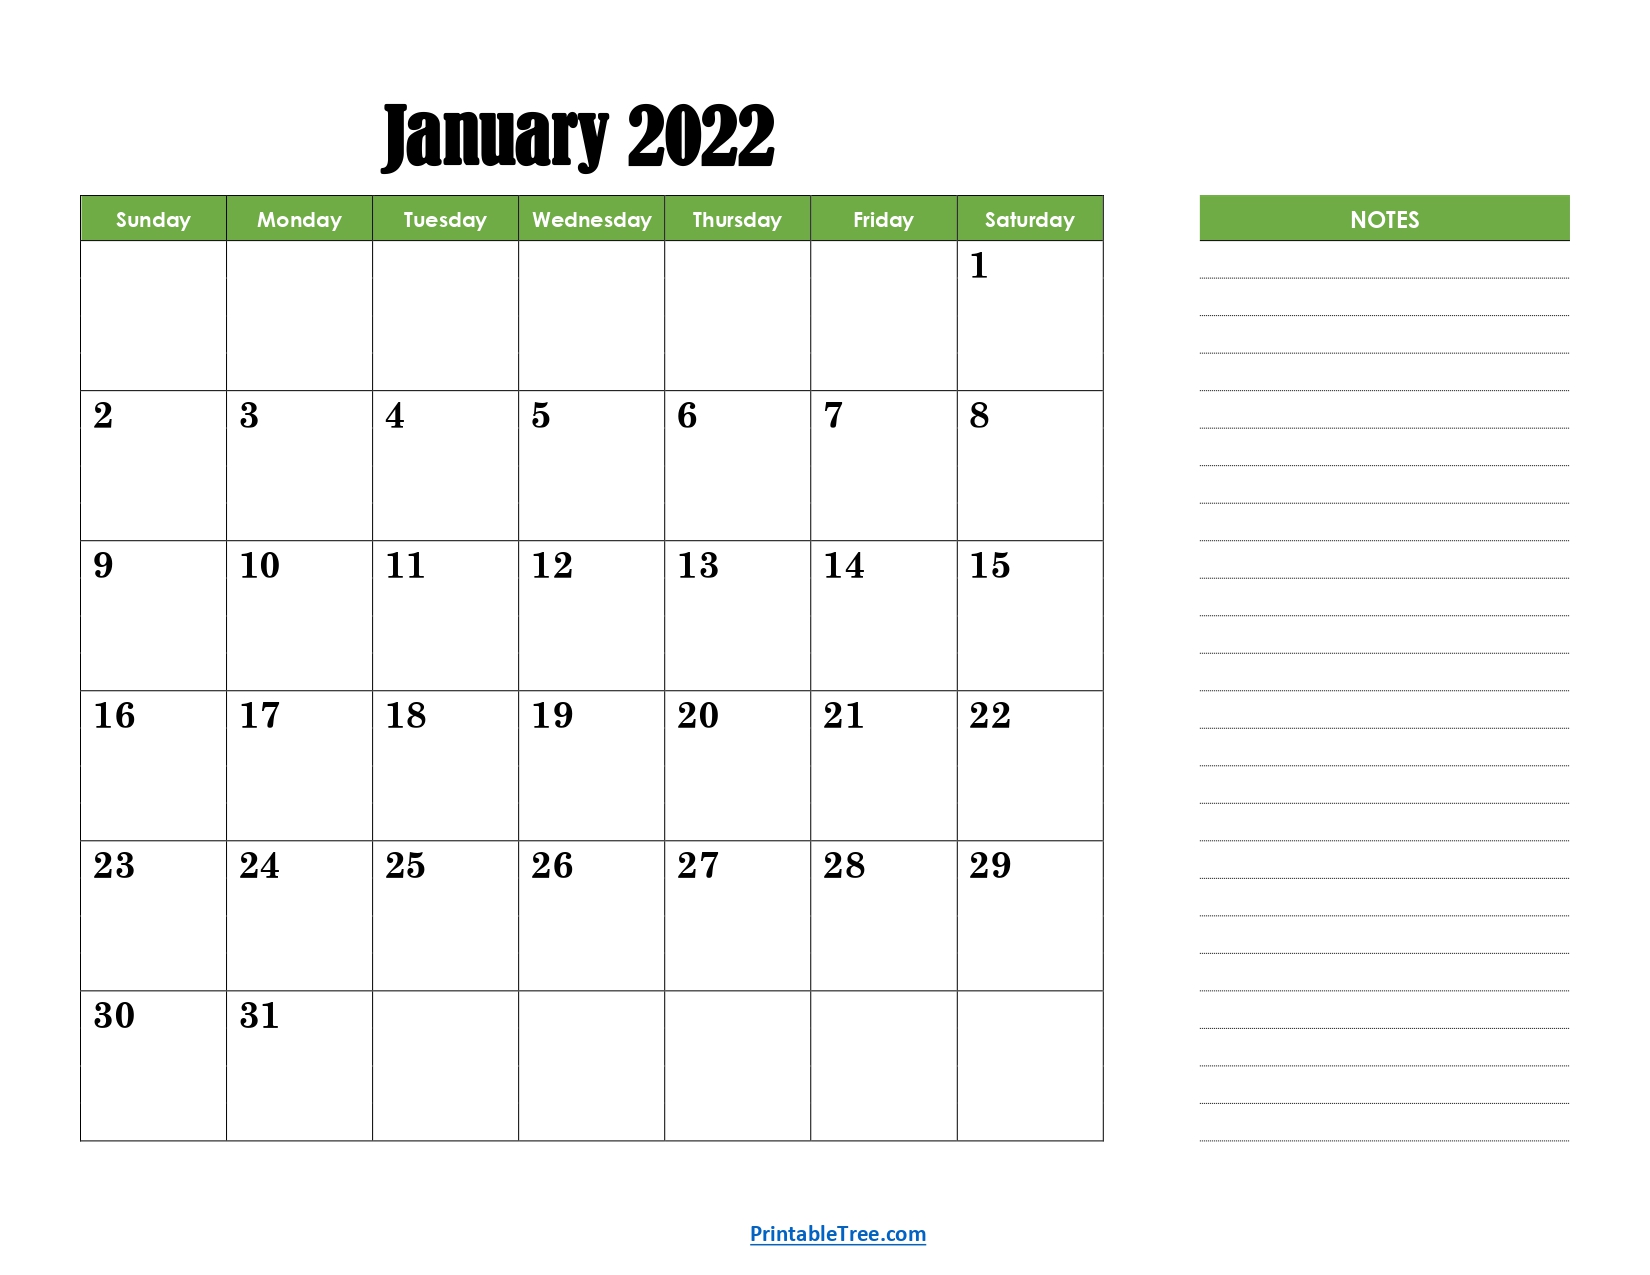 January 2022 Calendar with Green Notes